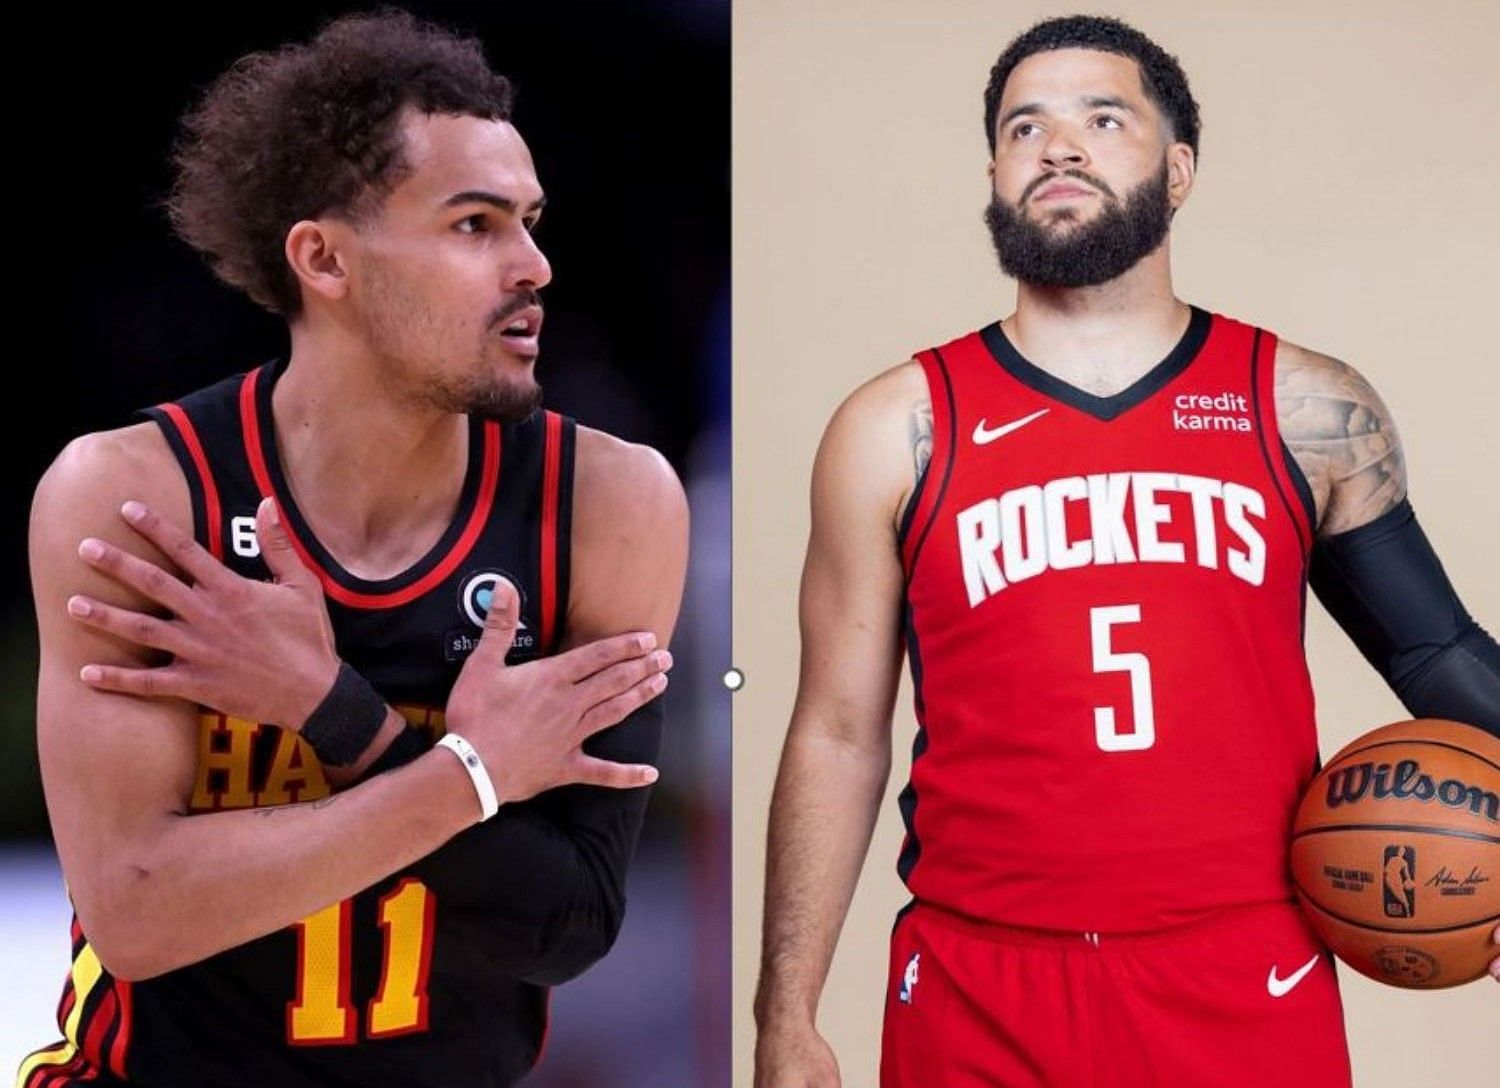 Atlanta Hawks vs Houston Rockets: Game details, preview, betting tips, prediction and more